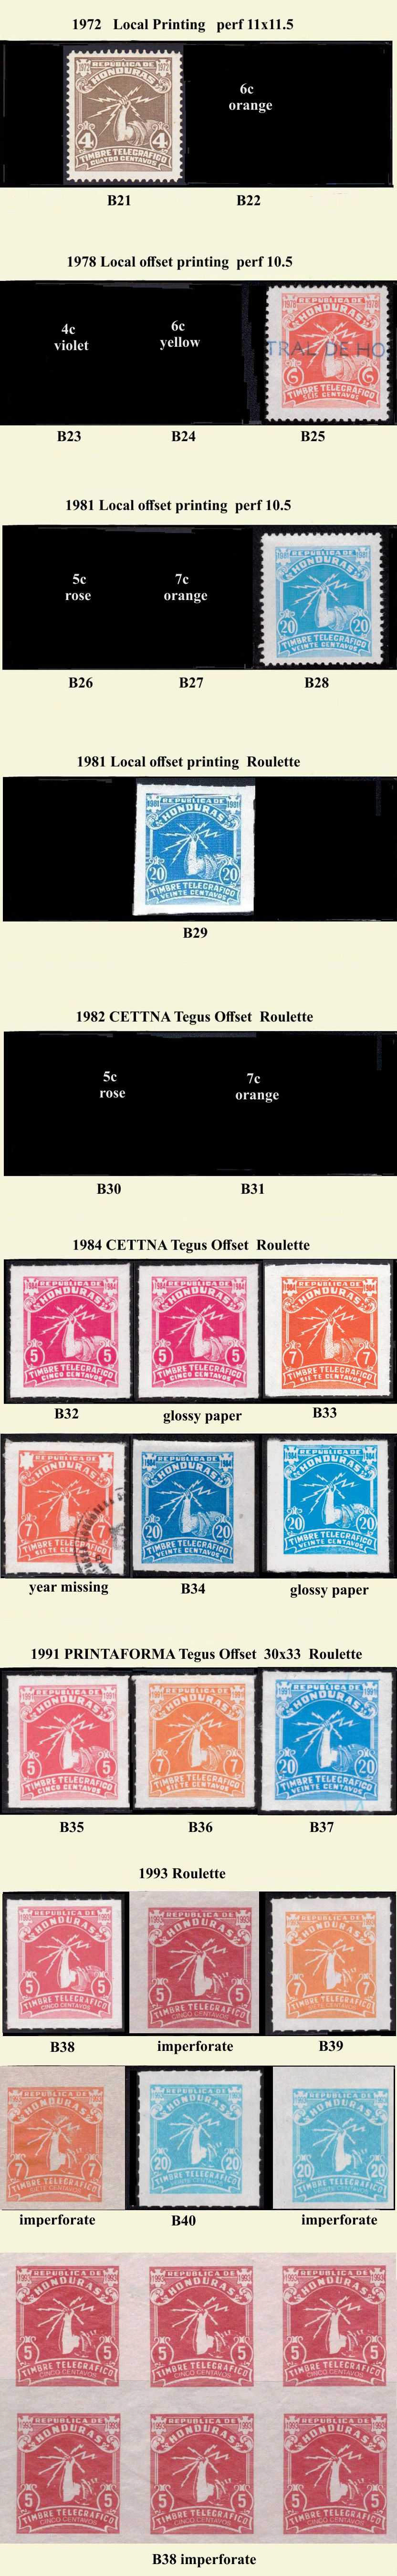 telegraph stamps after 1970